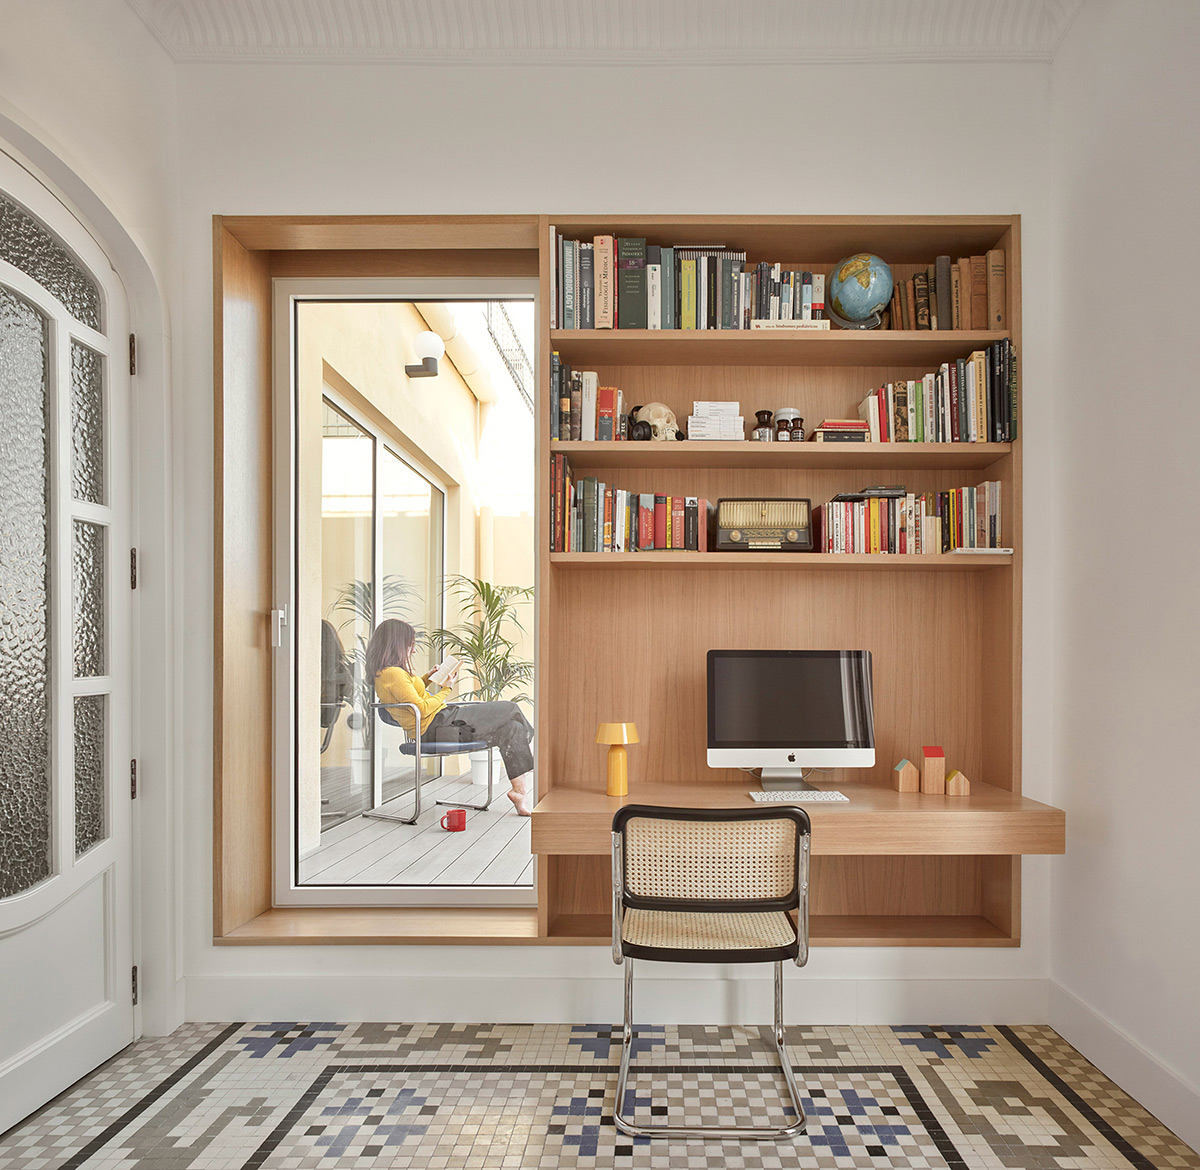 51 Small Home Office Ideas To Boost Your Productivity and Creativity